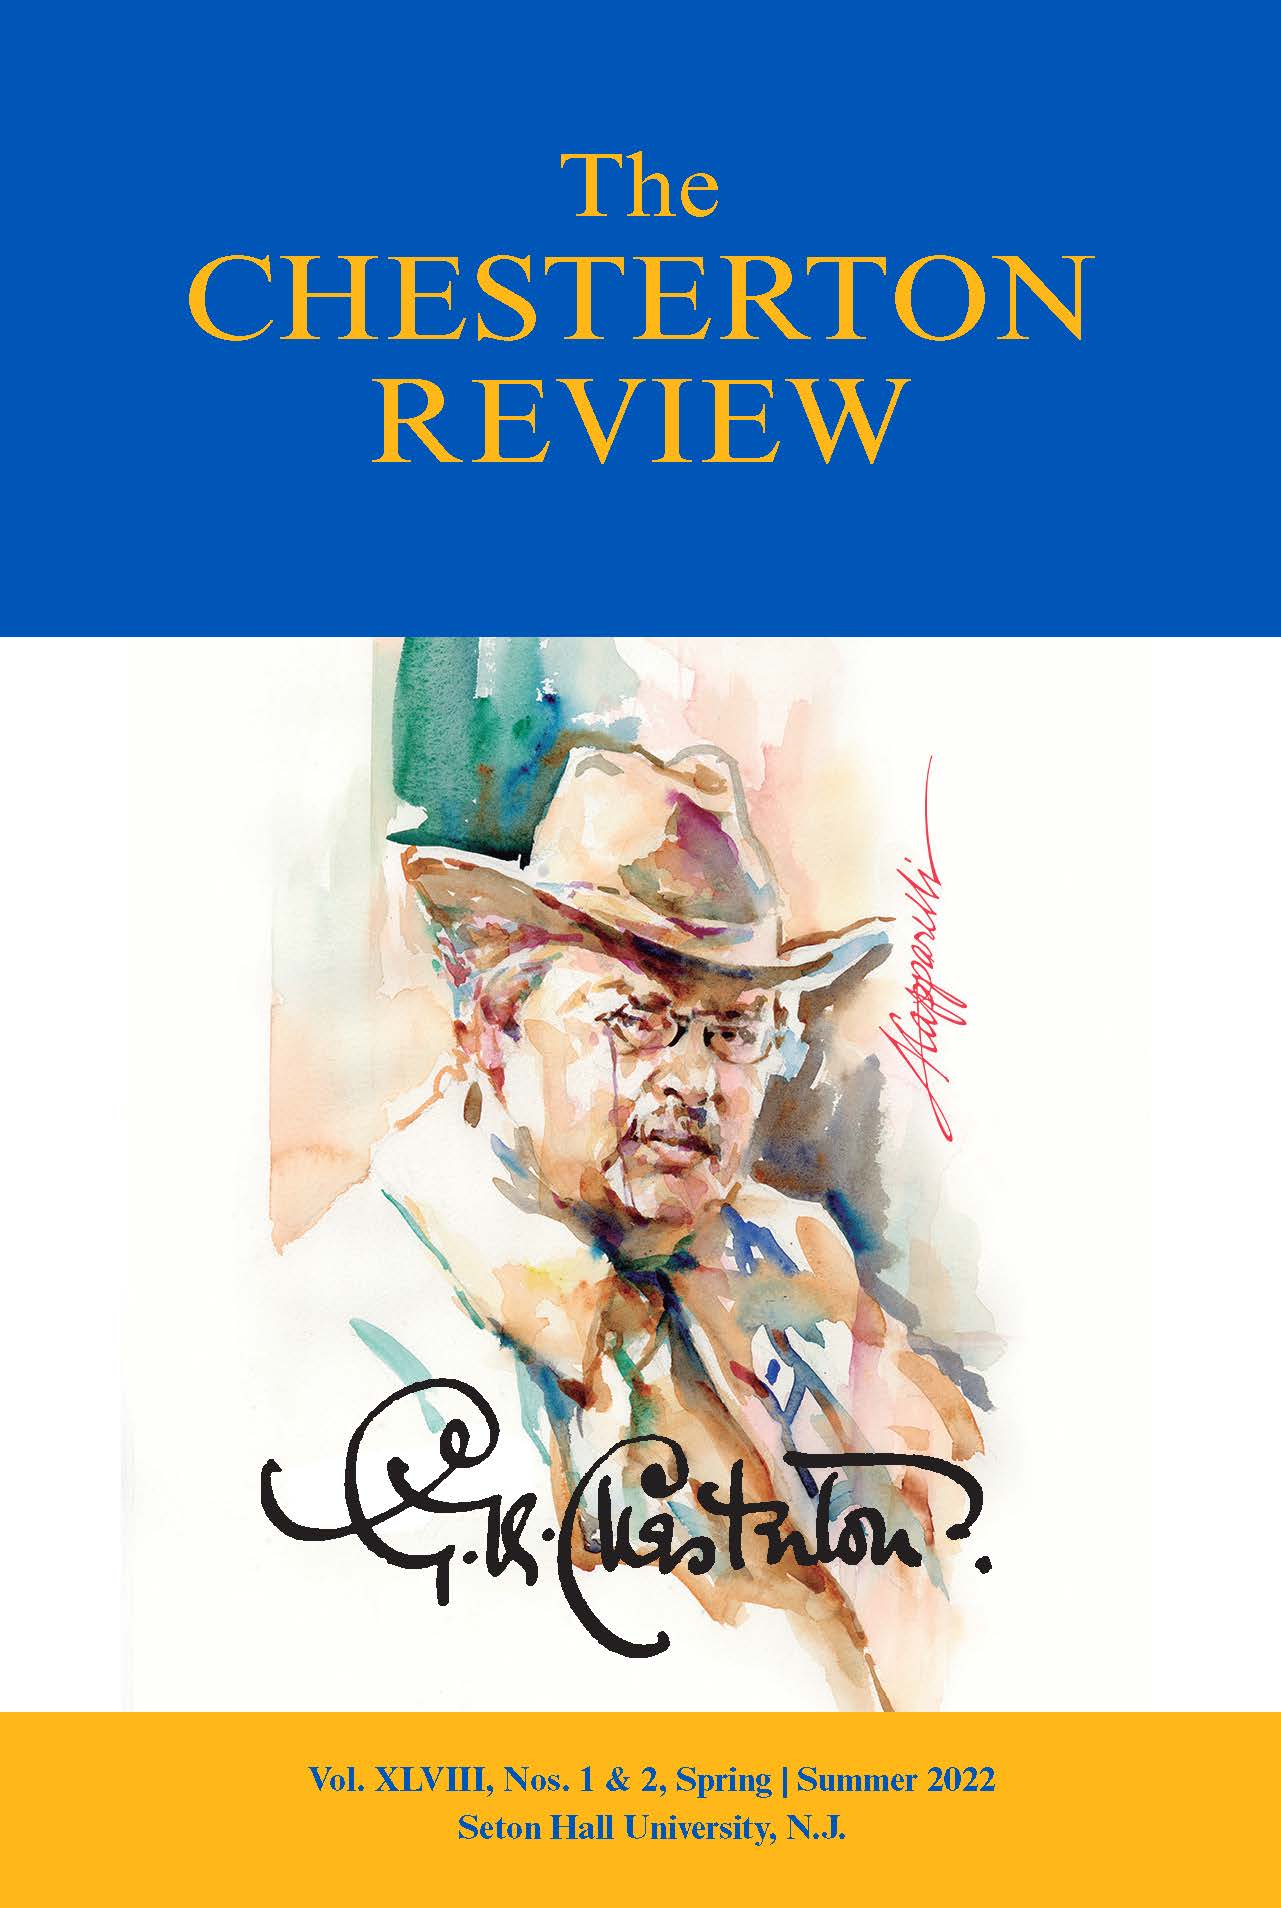 Image of the Chesterton Review, Vol 48, Numbers 1 and 2, Summer 2022 